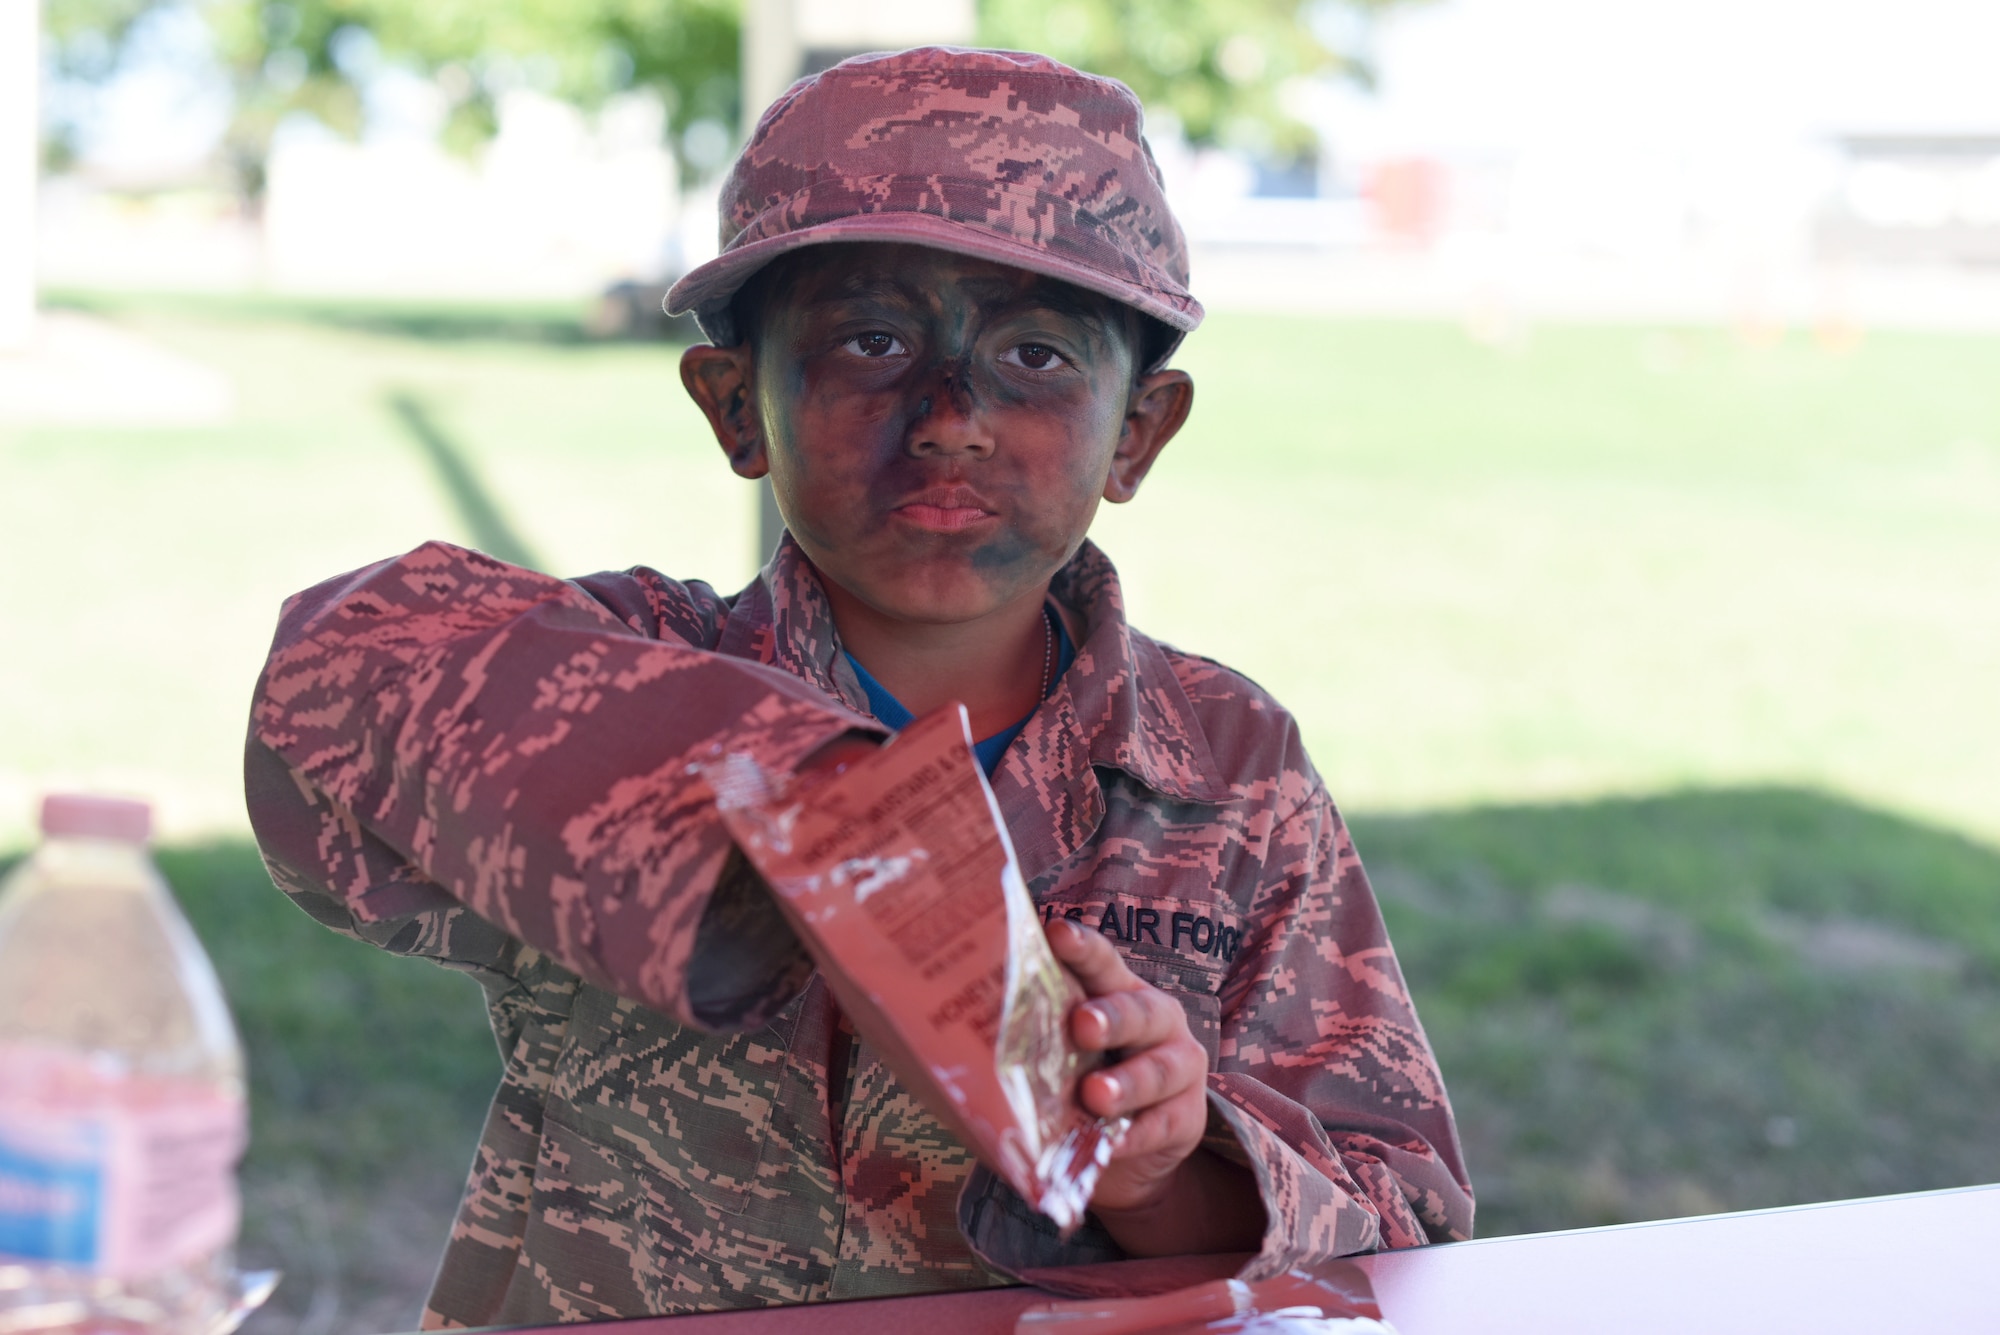 Art, an Operation KIDS participant, eats a Meal, Ready-to-Eat during lunch at the Louis F. Garland Department of Defense Fire Academy Goodfellow Air Force Base, Texas, Nov. 3, 2018. Art is a veteran, having participated in three Operation KIDS at Goodfellow and this year talked about how exciting it was being able to share the experience with his cousin. (U.S. Air Force photo by Airman 1st Class Seraiah Hines/Released)